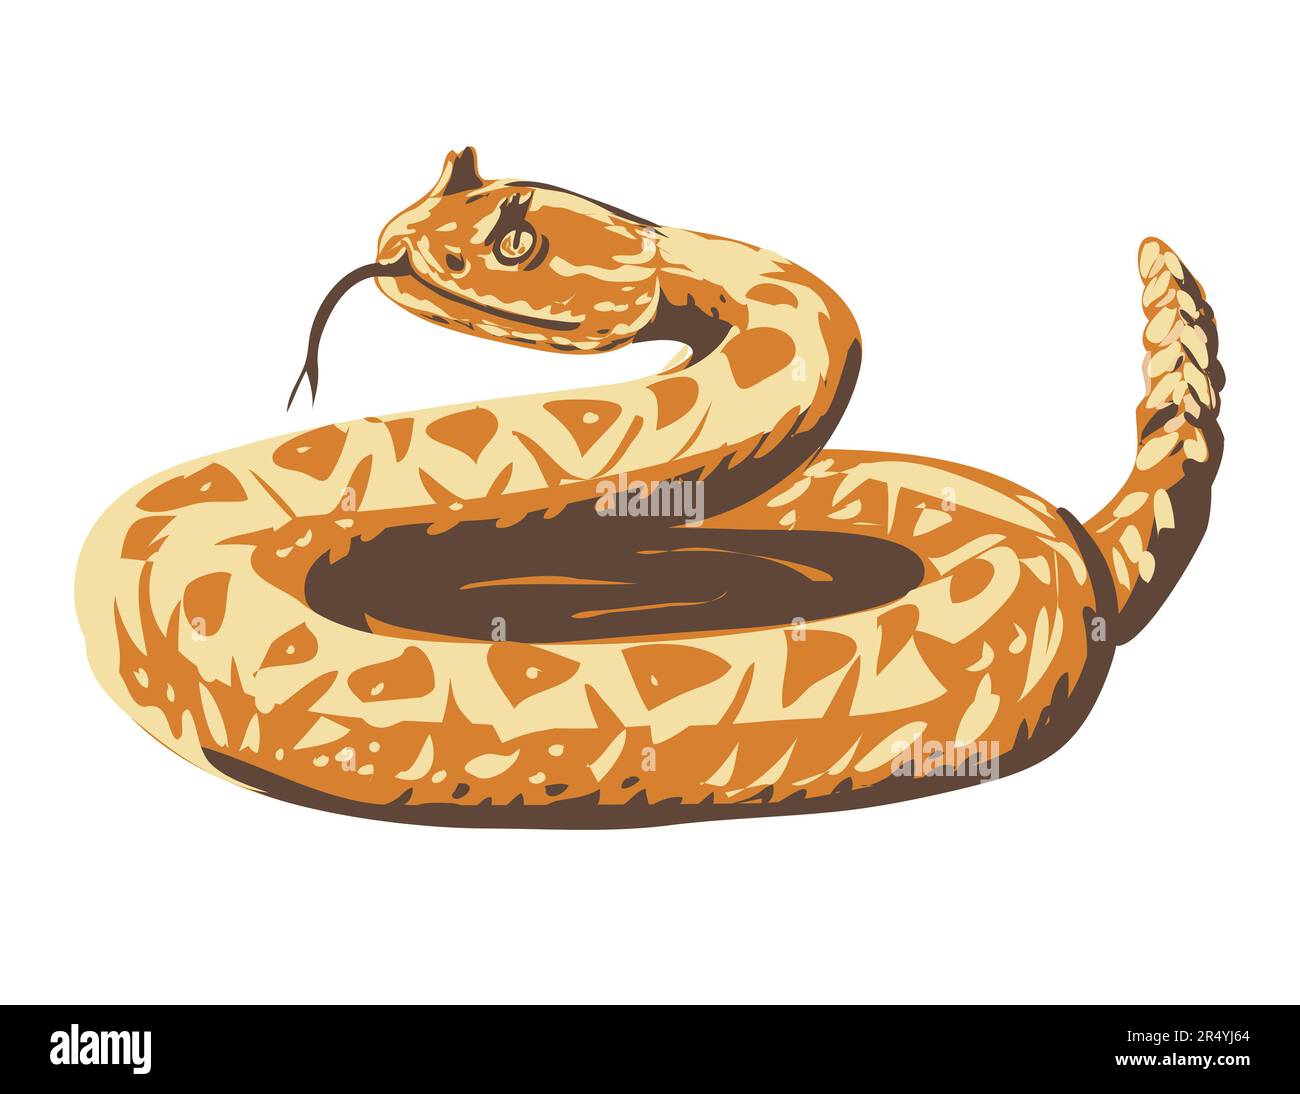 WPA poster art of a western diamondback rattlesnake or Texas diamond-back curled up done in works project administration style. Stock Photo